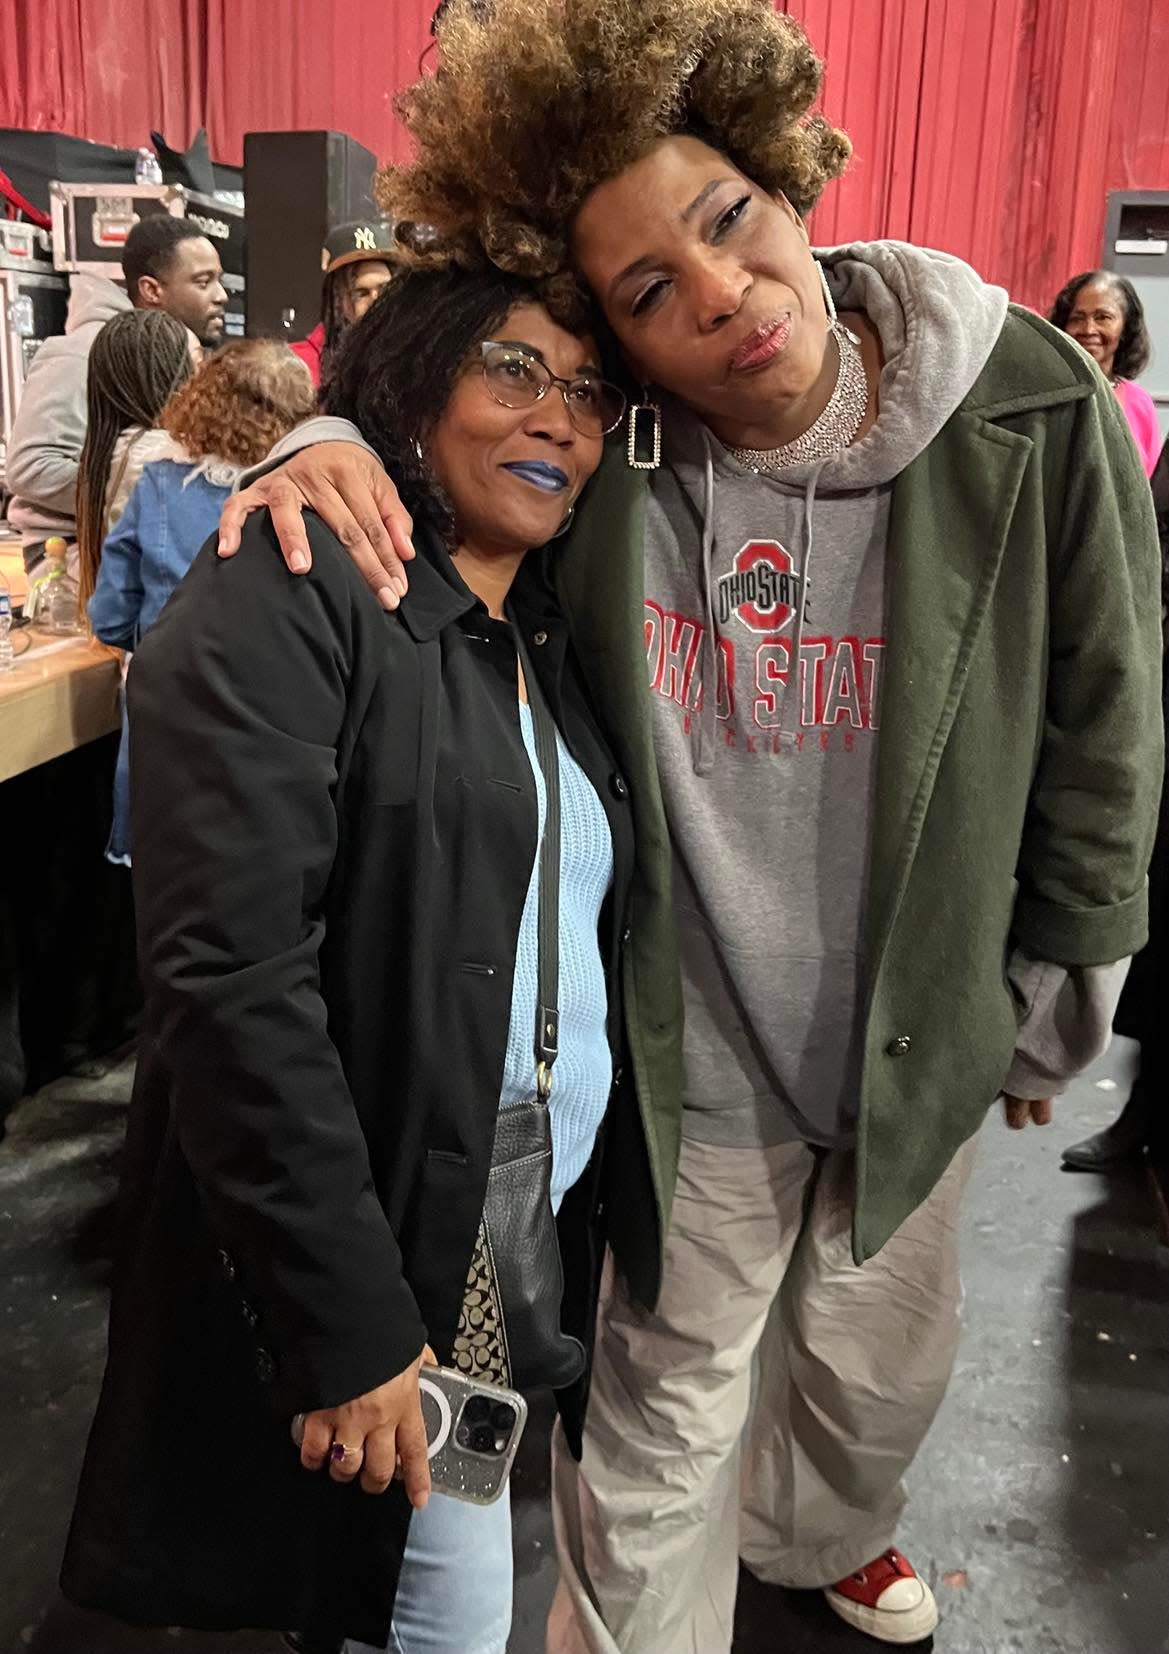 Macy Gray is shown meeting with friends and fans following her Dec. 16 concert at The Kent Stage. Gray, who won a Grammy in 2001, released a new album this year, "The Reset."